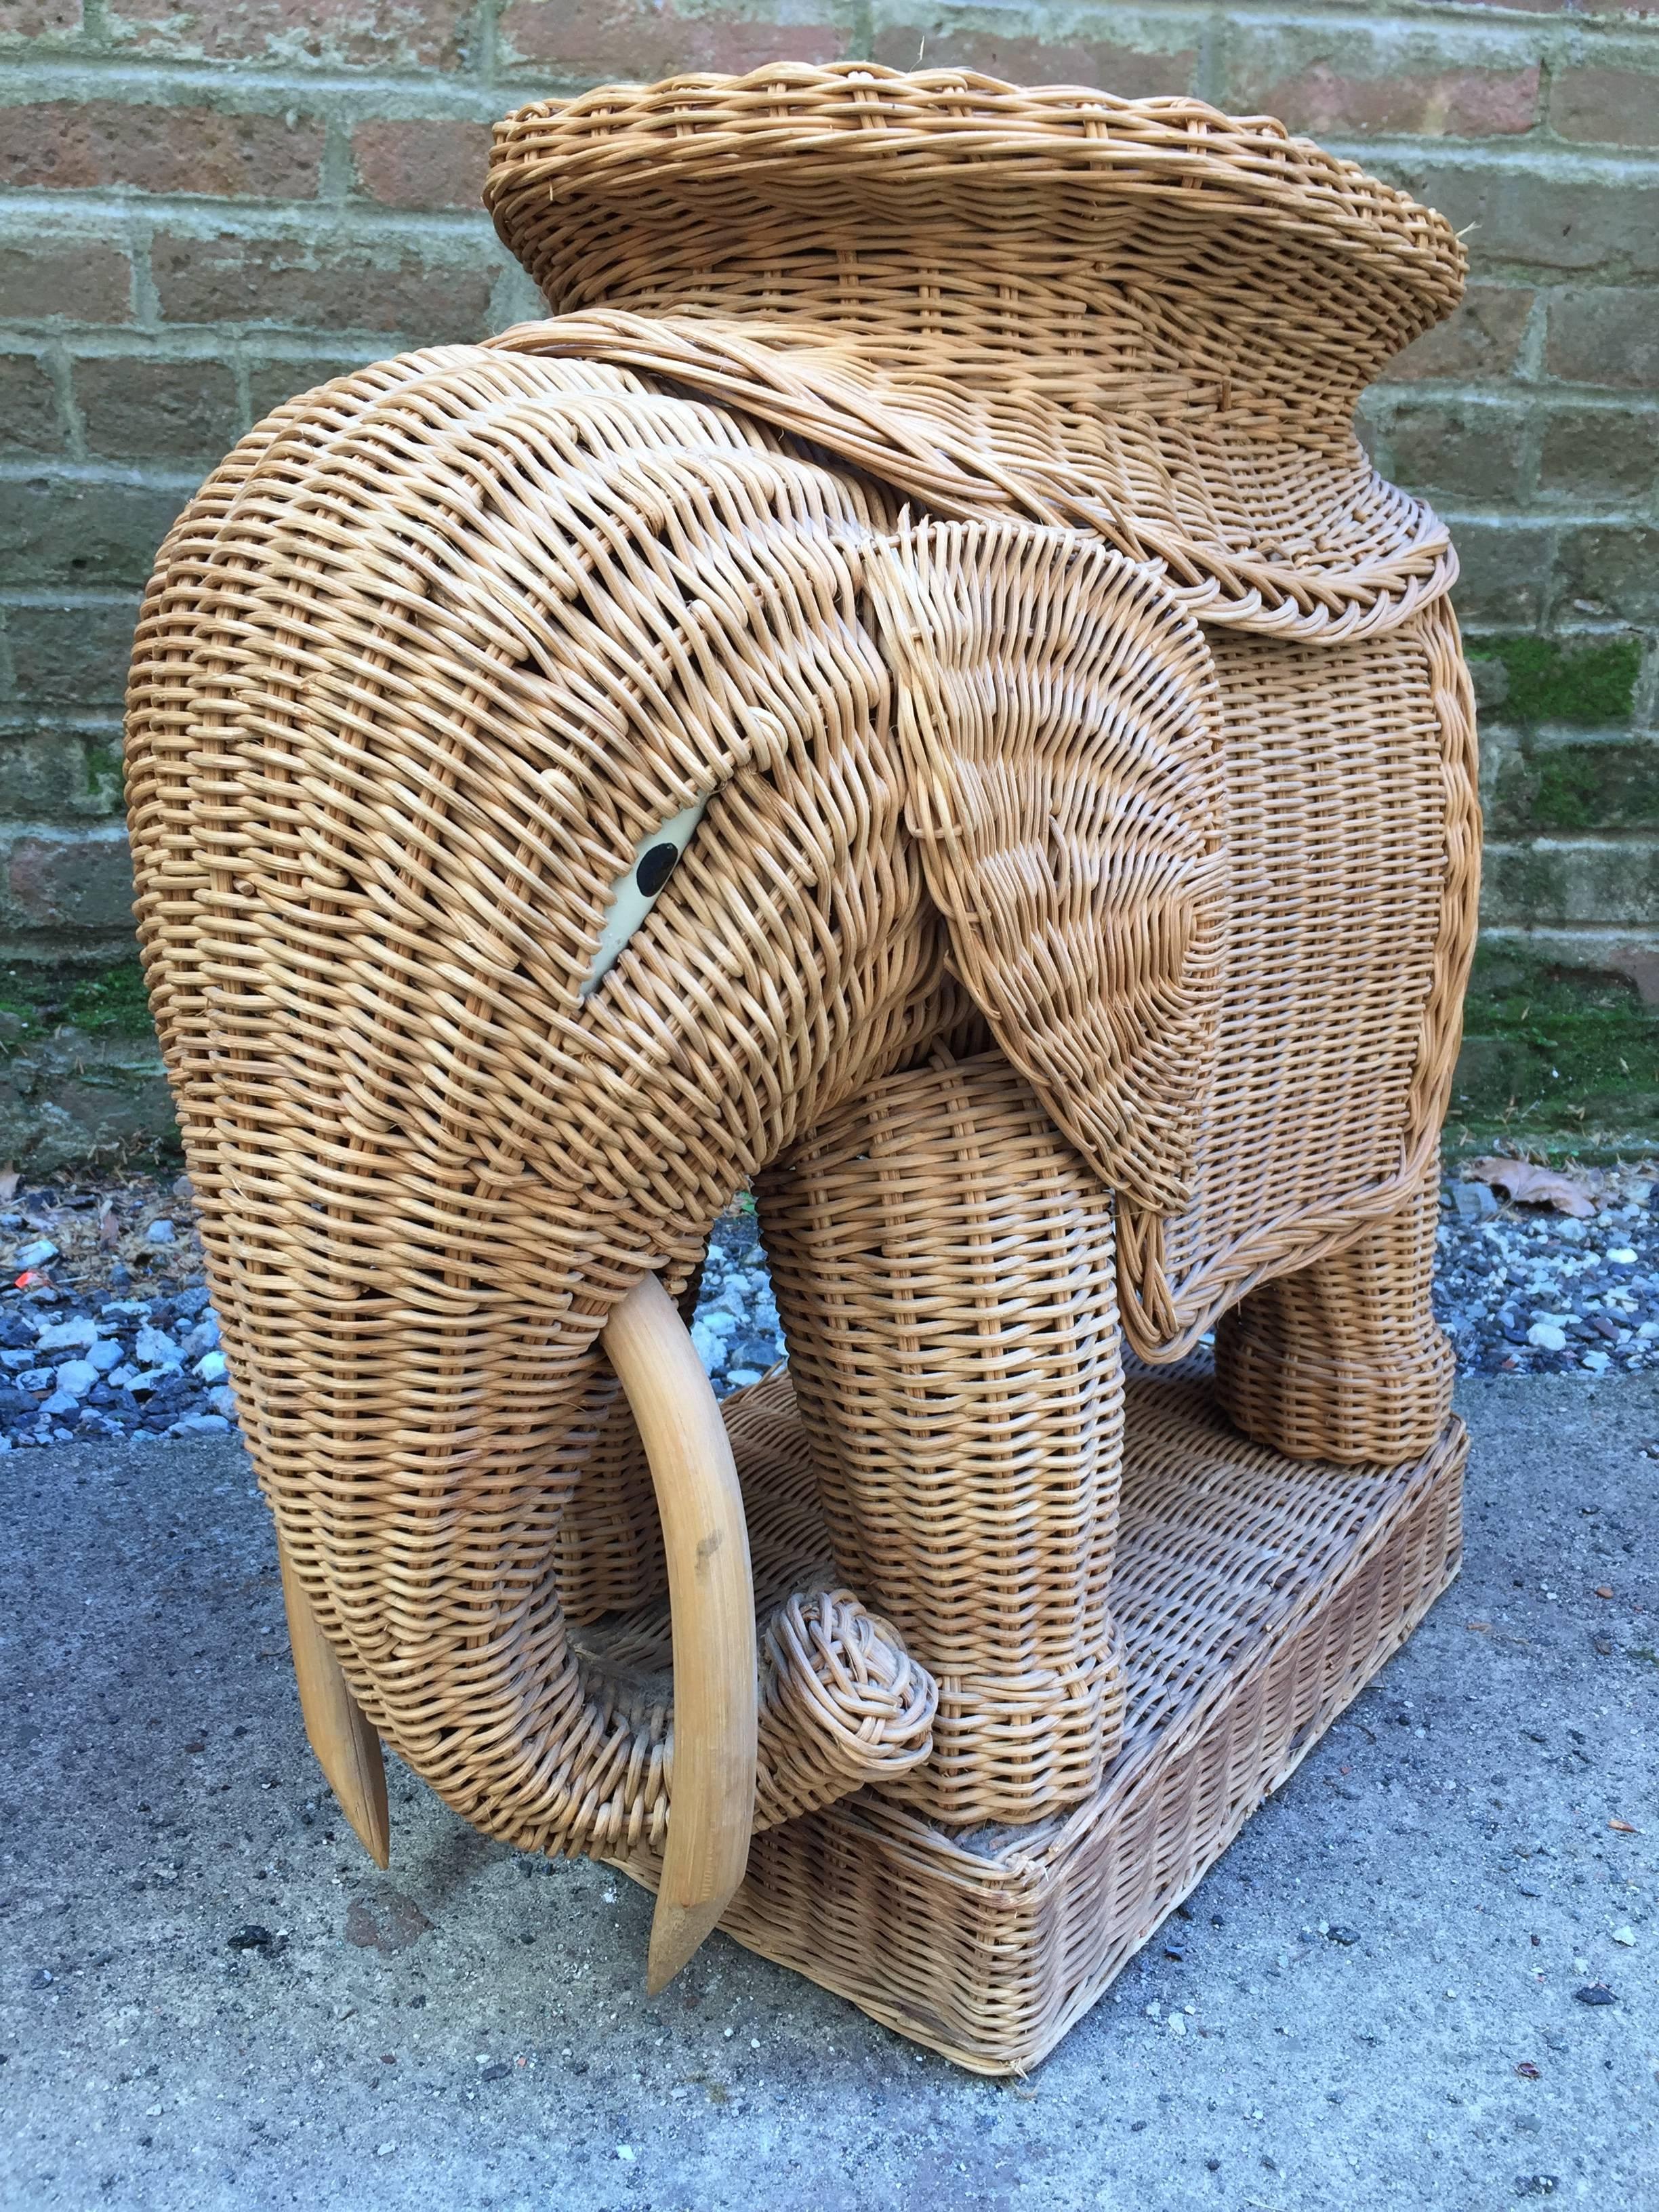 Woven Pair of Wicker and Bamboo Garden Stool Elephants